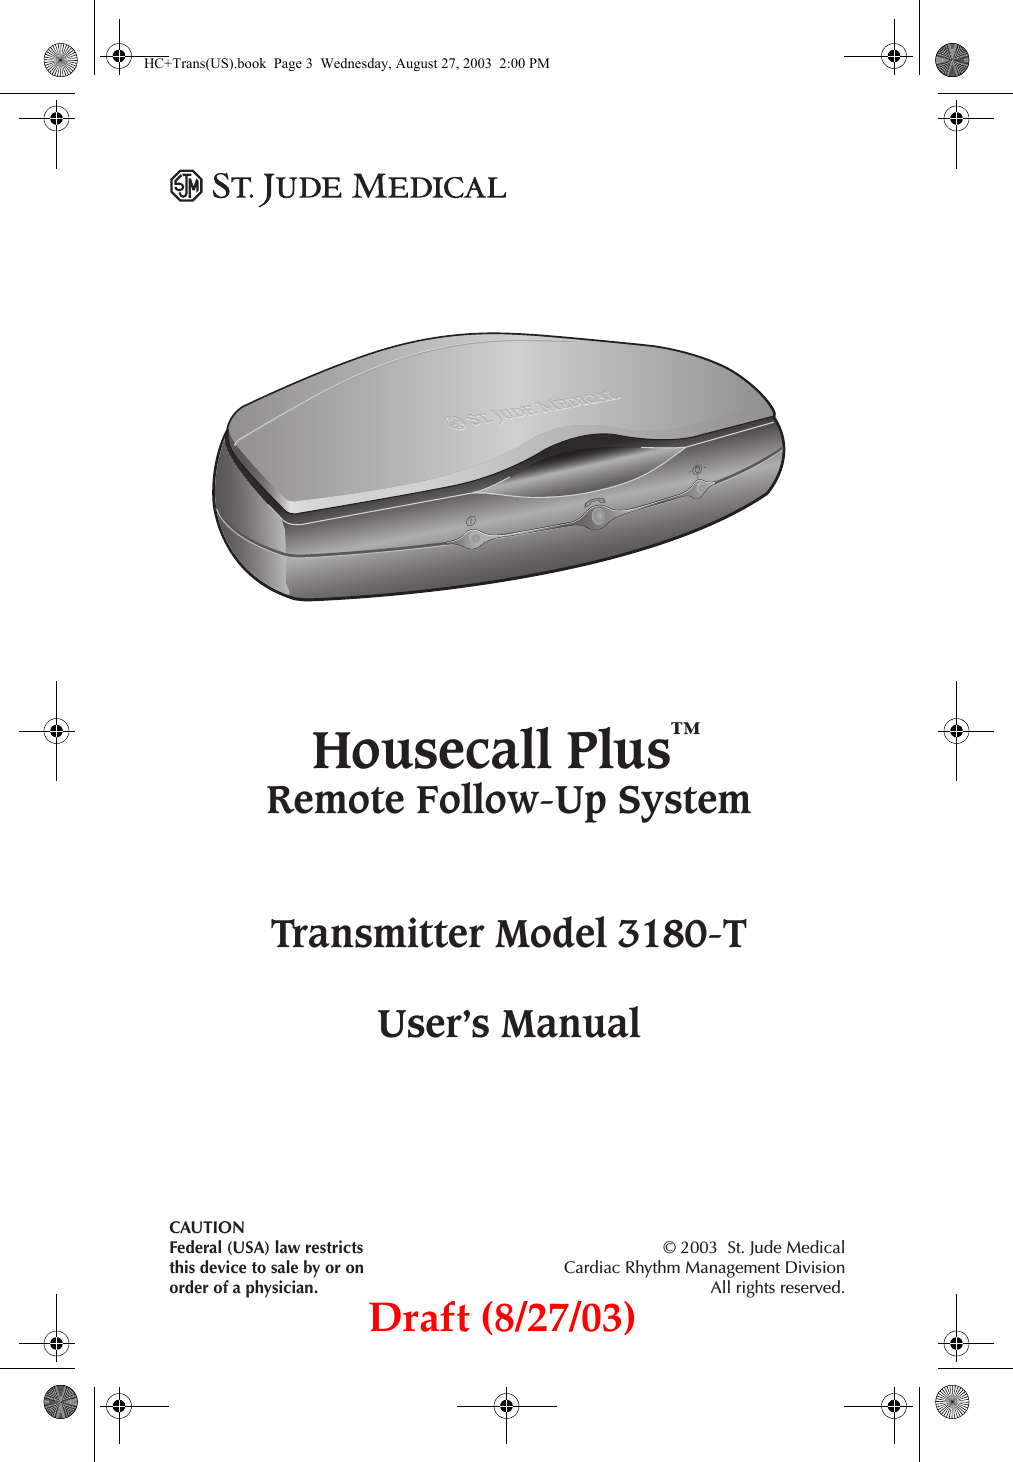 CAUTIONFederal (USA) law restrictsthis device to sale by or onorder of a physician.Housecall Plus™ Remote Follow-Up System Transmitter Model 3180-TUser’s Manual© 2003  St. Jude MedicalCardiac Rhythm Management DivisionAll rights reserved.HC+Trans(US).book  Page 3  Wednesday, August 27, 2003  2:00 PMDraft (8/27/03)